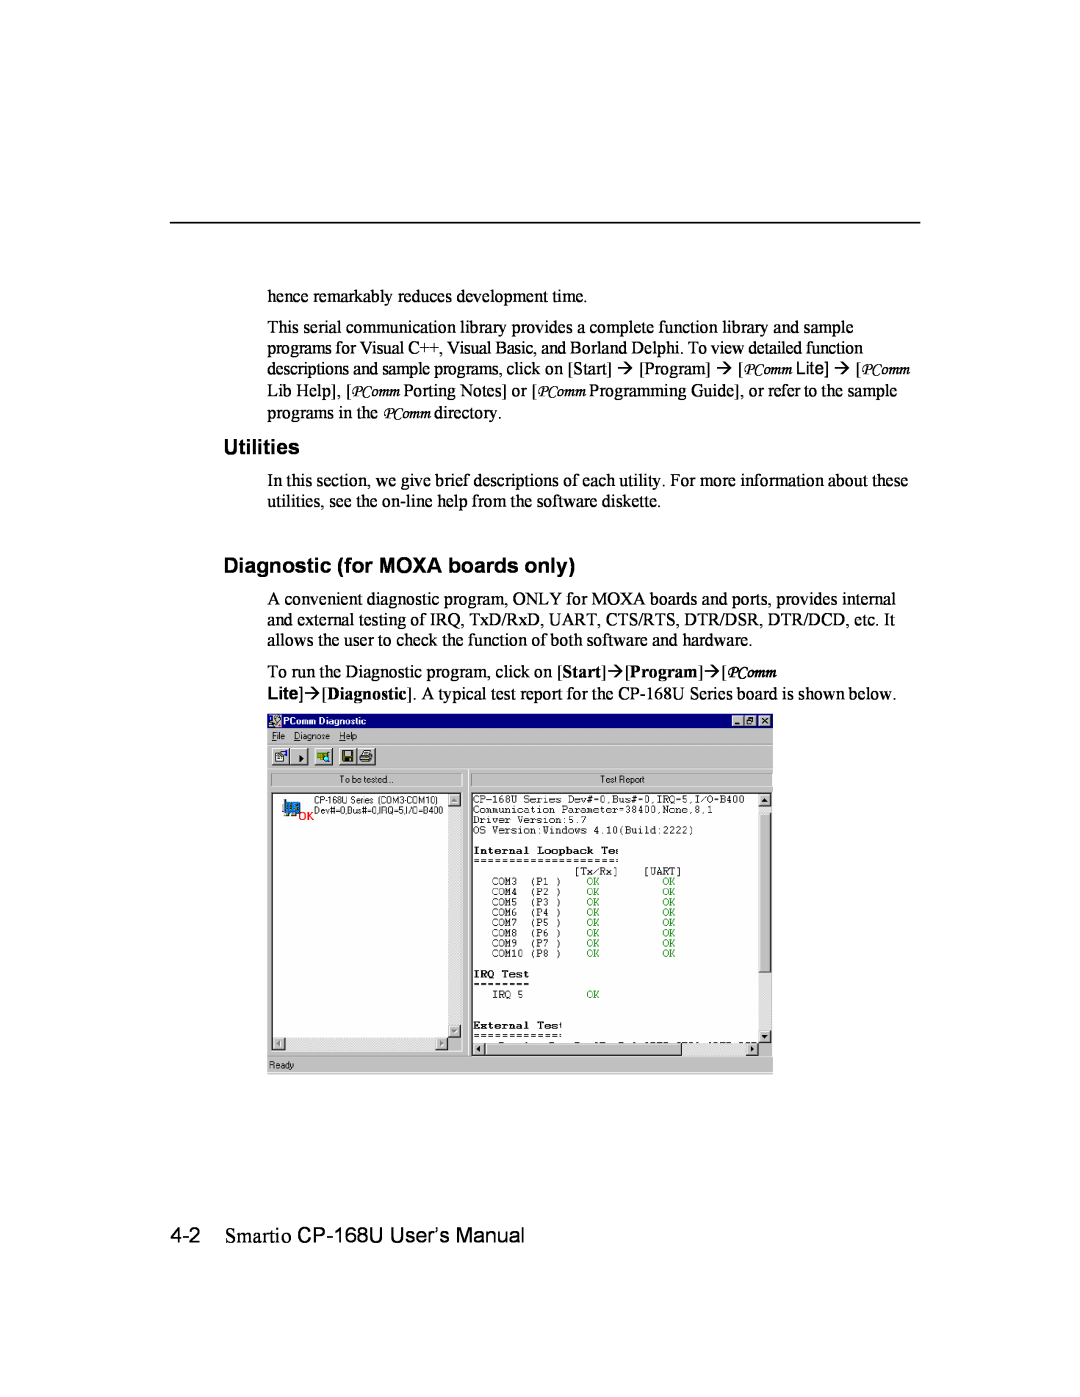 Moxa Technologies user manual Smartio CP-168U User’s Manual, Utilities, Diagnostic for MOXA boards only 